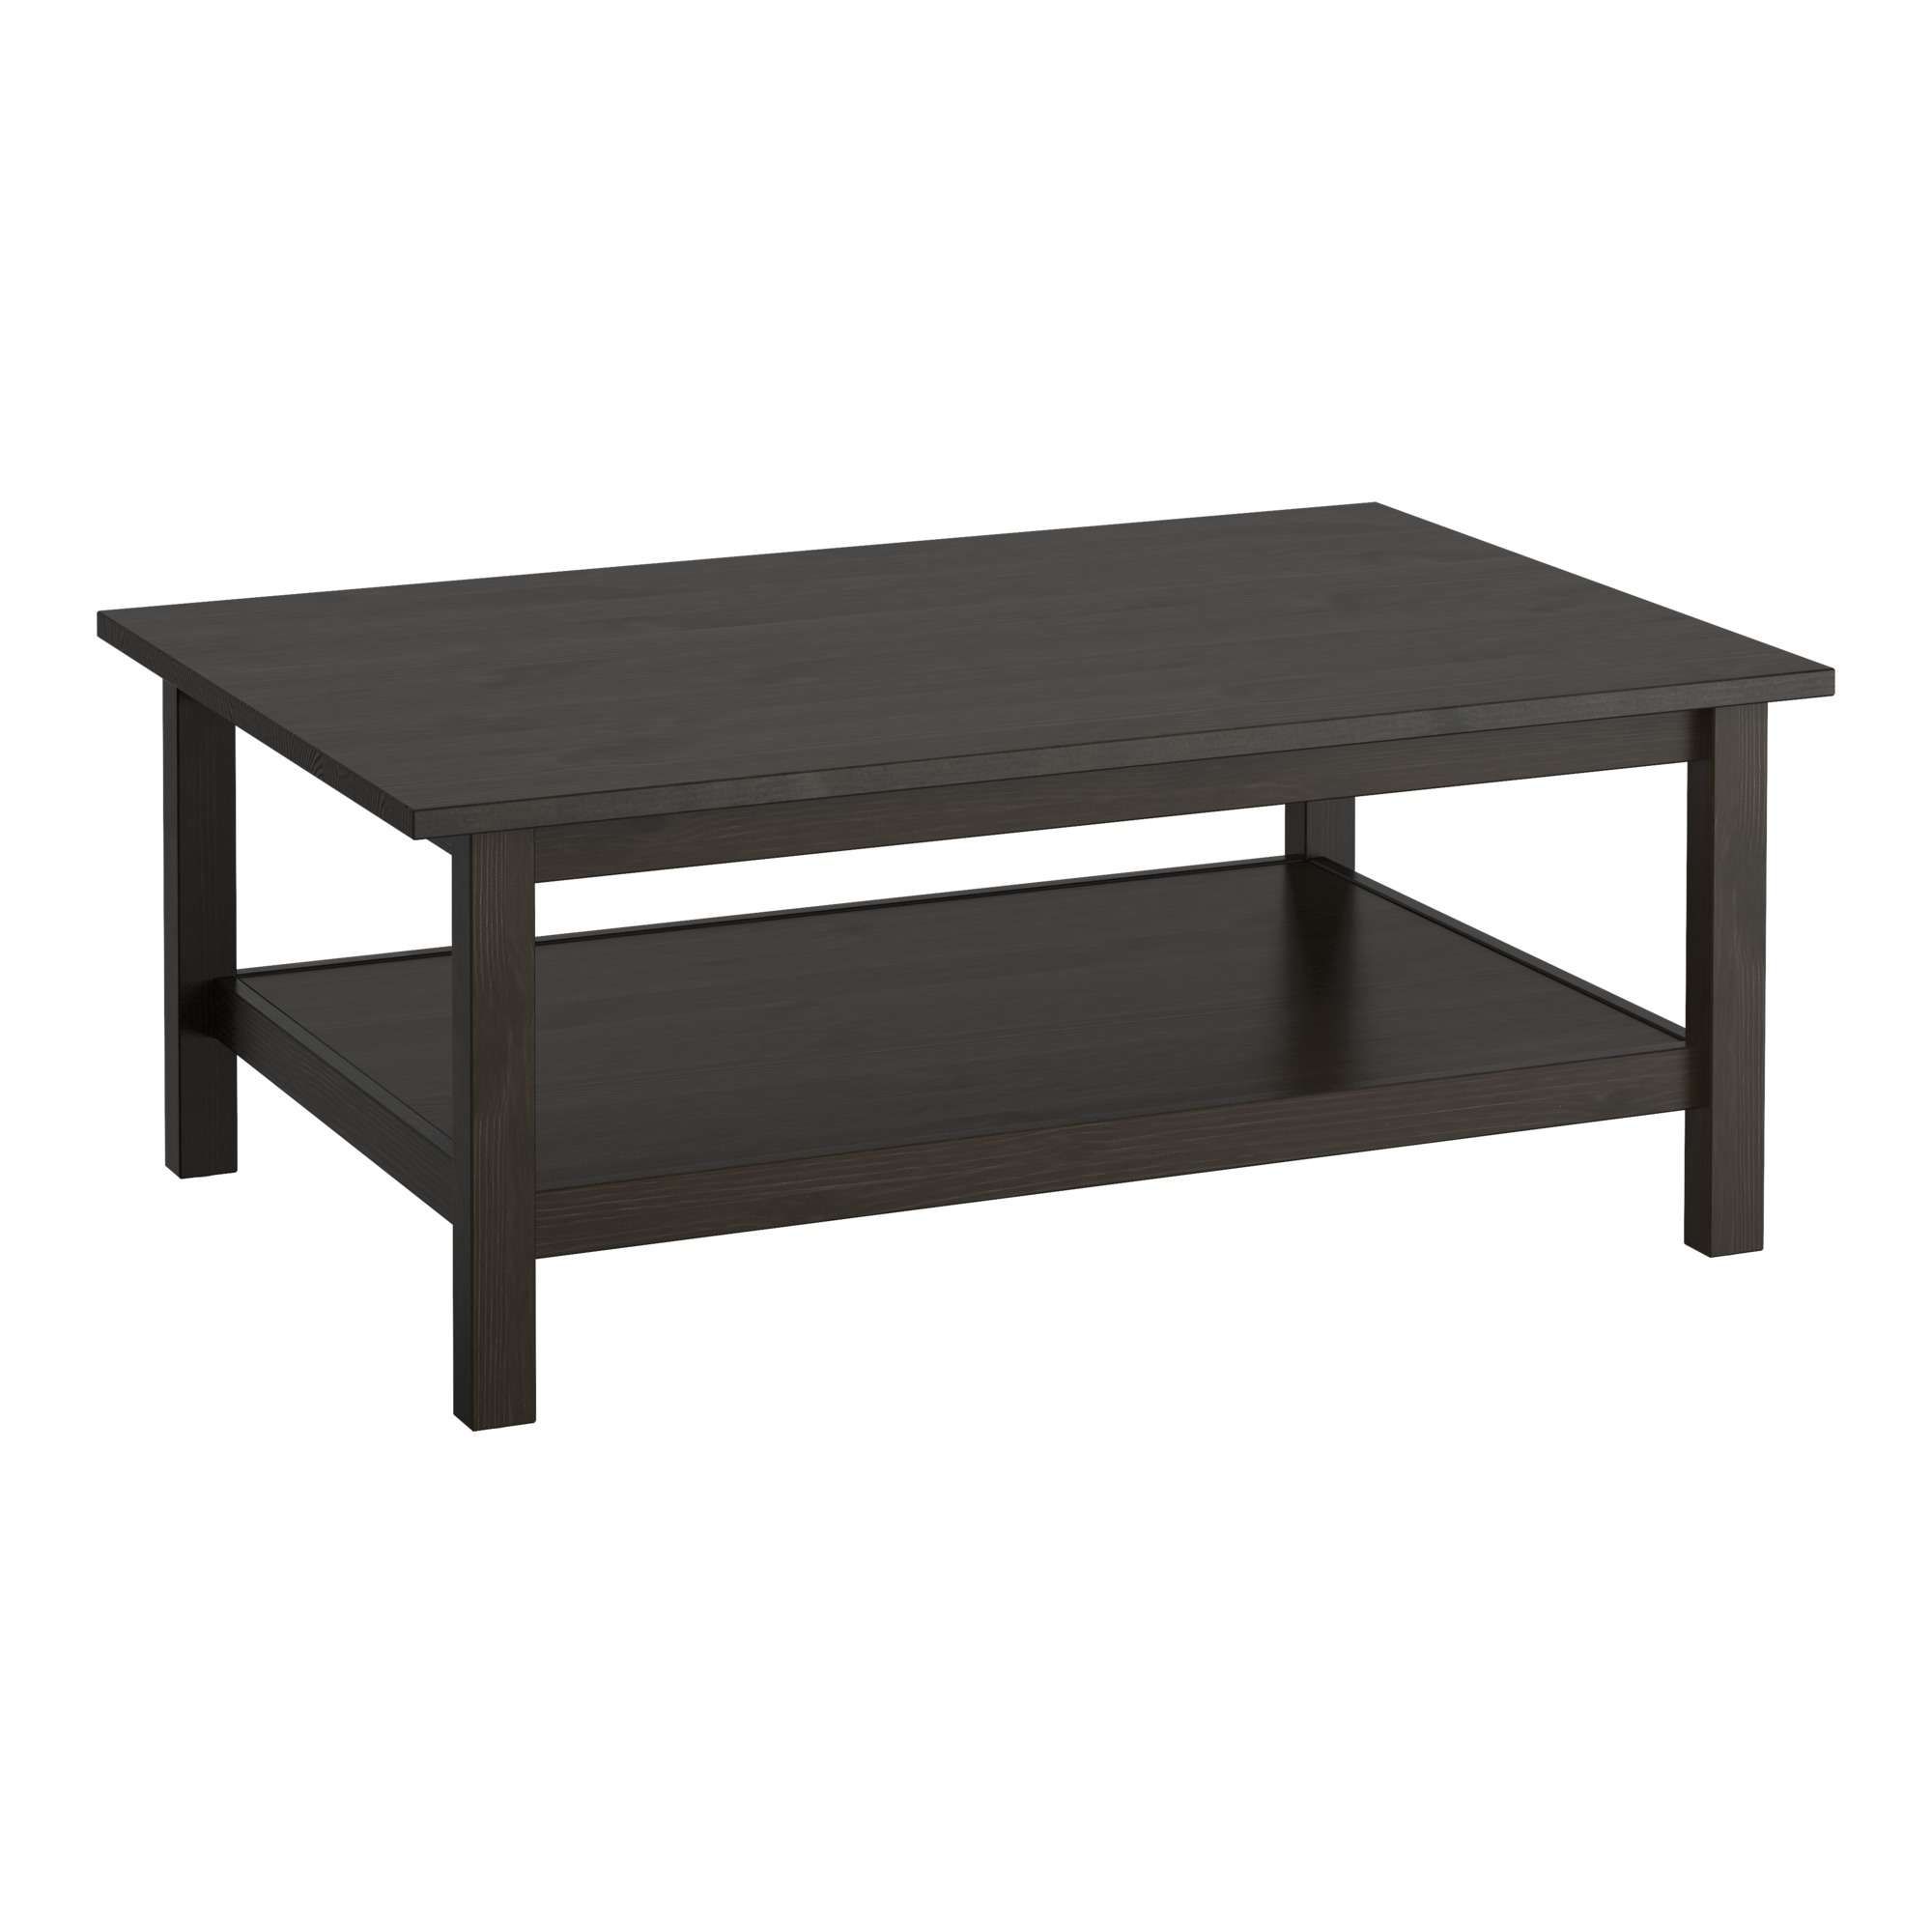 Most Popular Dark Coffee Tables Throughout Hemnes Coffee Table – White Stain – Ikea (View 2 of 20)